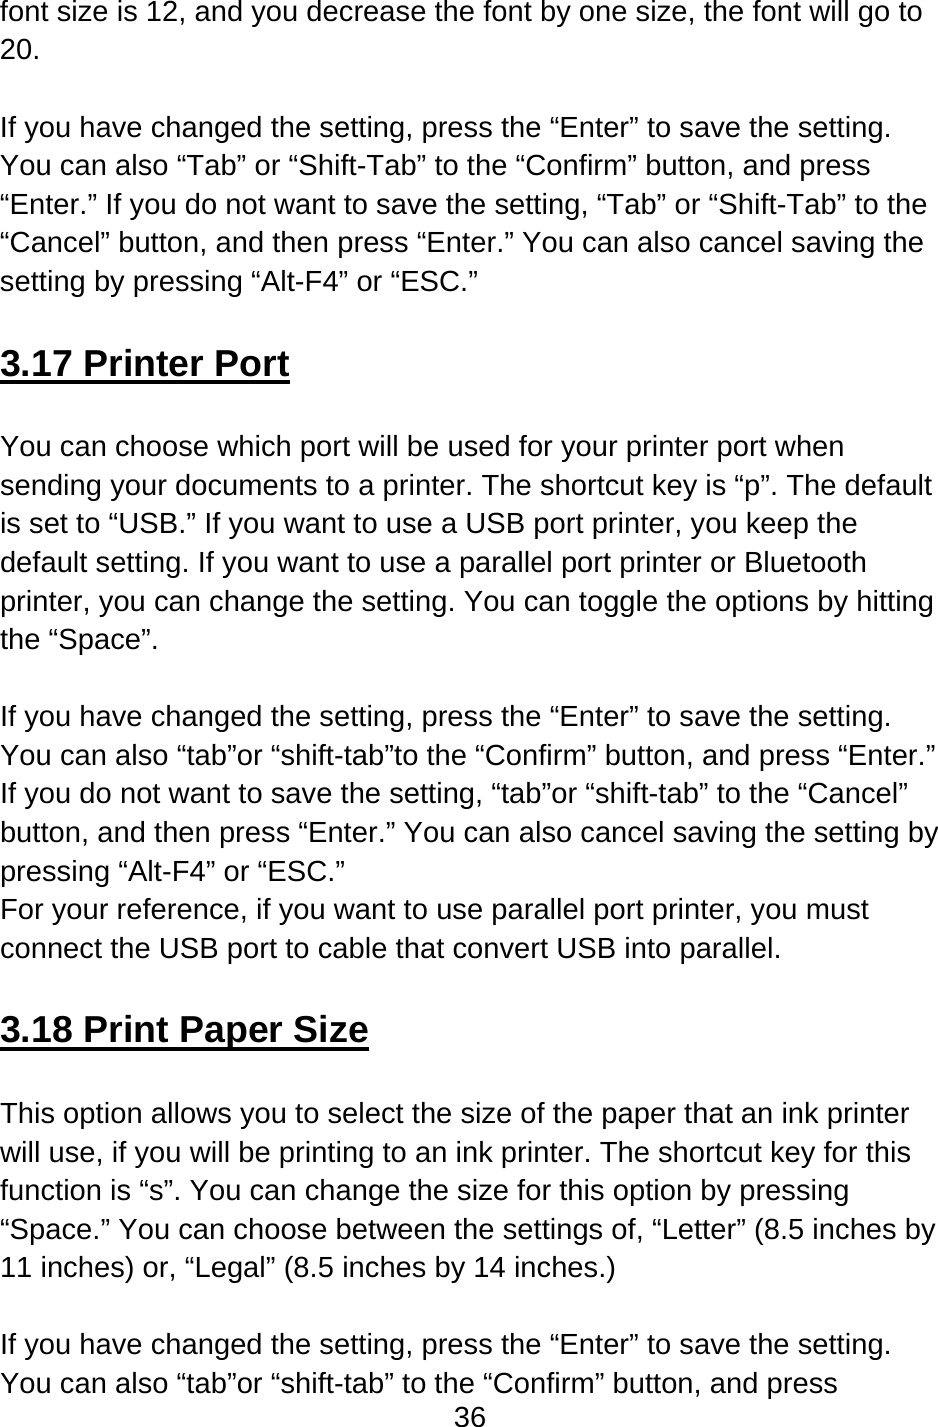 36  font size is 12, and you decrease the font by one size, the font will go to 20.  If you have changed the setting, press the “Enter” to save the setting.   You can also “Tab” or “Shift-Tab” to the “Confirm” button, and press “Enter.” If you do not want to save the setting, “Tab” or “Shift-Tab” to the “Cancel” button, and then press “Enter.” You can also cancel saving the setting by pressing “Alt-F4” or “ESC.”  3.17 Printer Port  You can choose which port will be used for your printer port when sending your documents to a printer. The shortcut key is “p”. The default is set to “USB.” If you want to use a USB port printer, you keep the default setting. If you want to use a parallel port printer or Bluetooth printer, you can change the setting. You can toggle the options by hitting the “Space”.  If you have changed the setting, press the “Enter” to save the setting.   You can also “tab”or “shift-tab”to the “Confirm” button, and press “Enter.”   If you do not want to save the setting, “tab”or “shift-tab” to the “Cancel” button, and then press “Enter.” You can also cancel saving the setting by pressing “Alt-F4” or “ESC.” For your reference, if you want to use parallel port printer, you must connect the USB port to cable that convert USB into parallel.  3.18 Print Paper Size  This option allows you to select the size of the paper that an ink printer will use, if you will be printing to an ink printer. The shortcut key for this function is “s”. You can change the size for this option by pressing “Space.” You can choose between the settings of, “Letter” (8.5 inches by 11 inches) or, “Legal” (8.5 inches by 14 inches.)  If you have changed the setting, press the “Enter” to save the setting.   You can also “tab”or “shift-tab” to the “Confirm” button, and press 